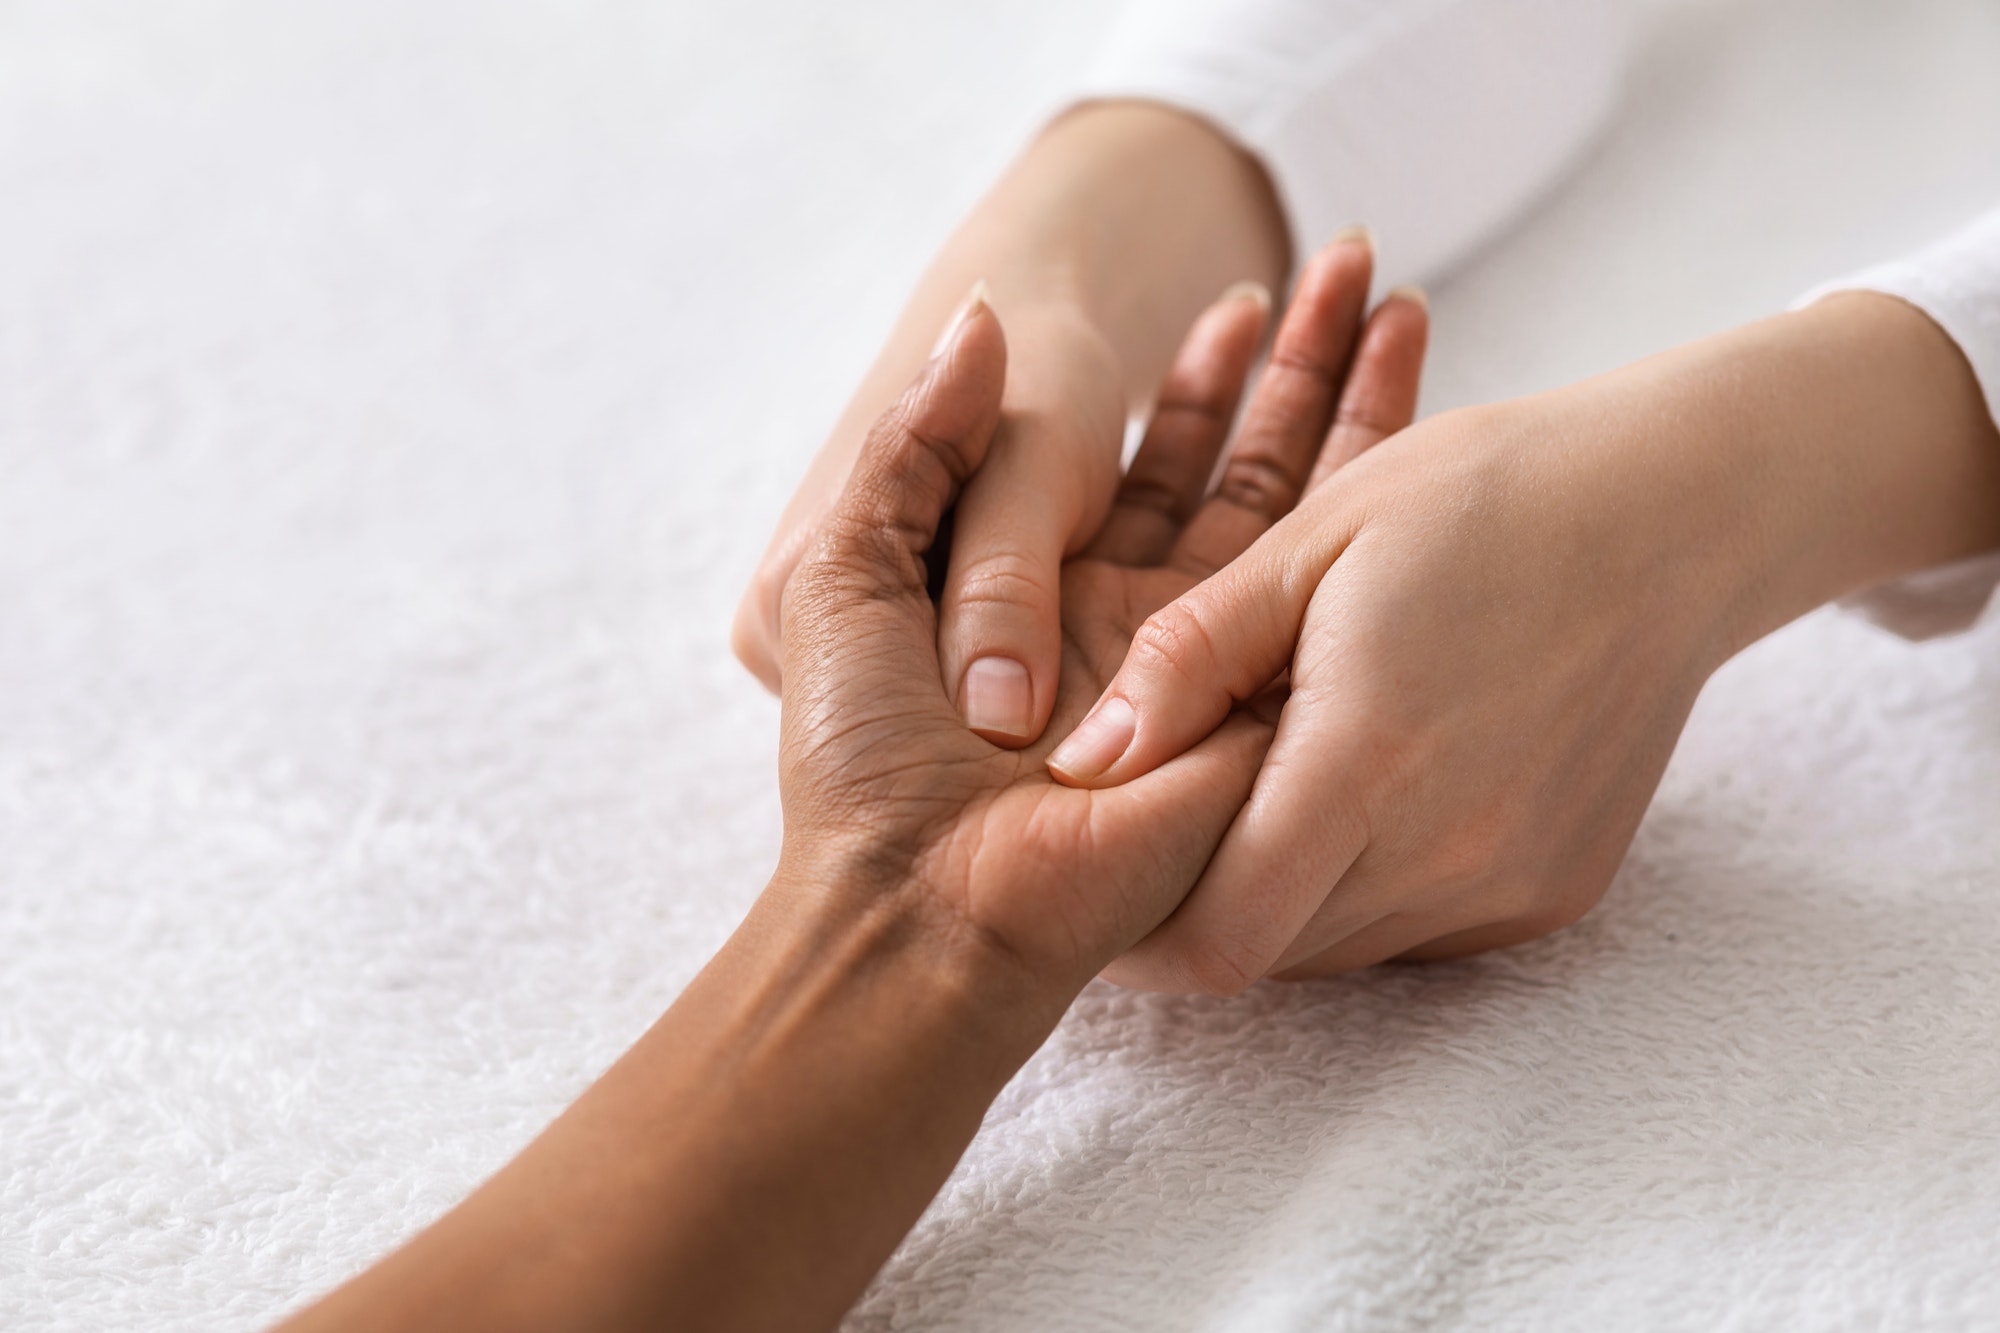 Acupuncture hand massage for black woman at spa